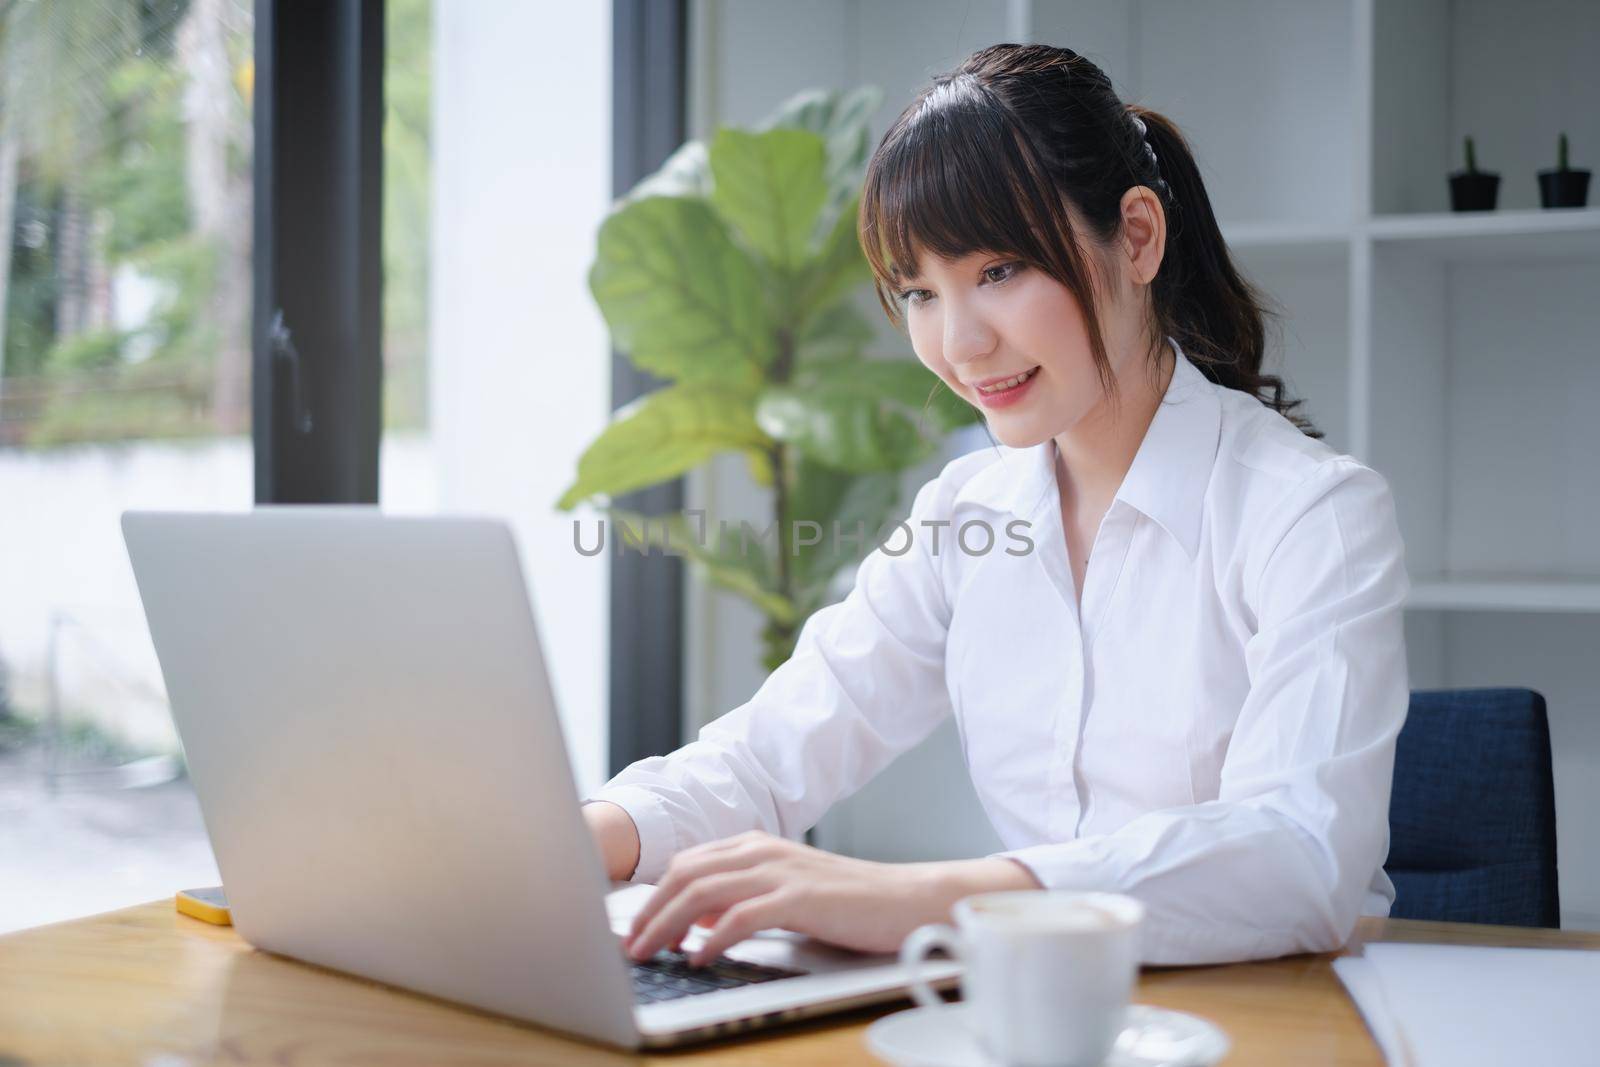 E-learning ,online ,education and internet social distancing protect from COVID-19 viruses concept. Asian woman student video conference e-learning with teacher on digital tablet at home